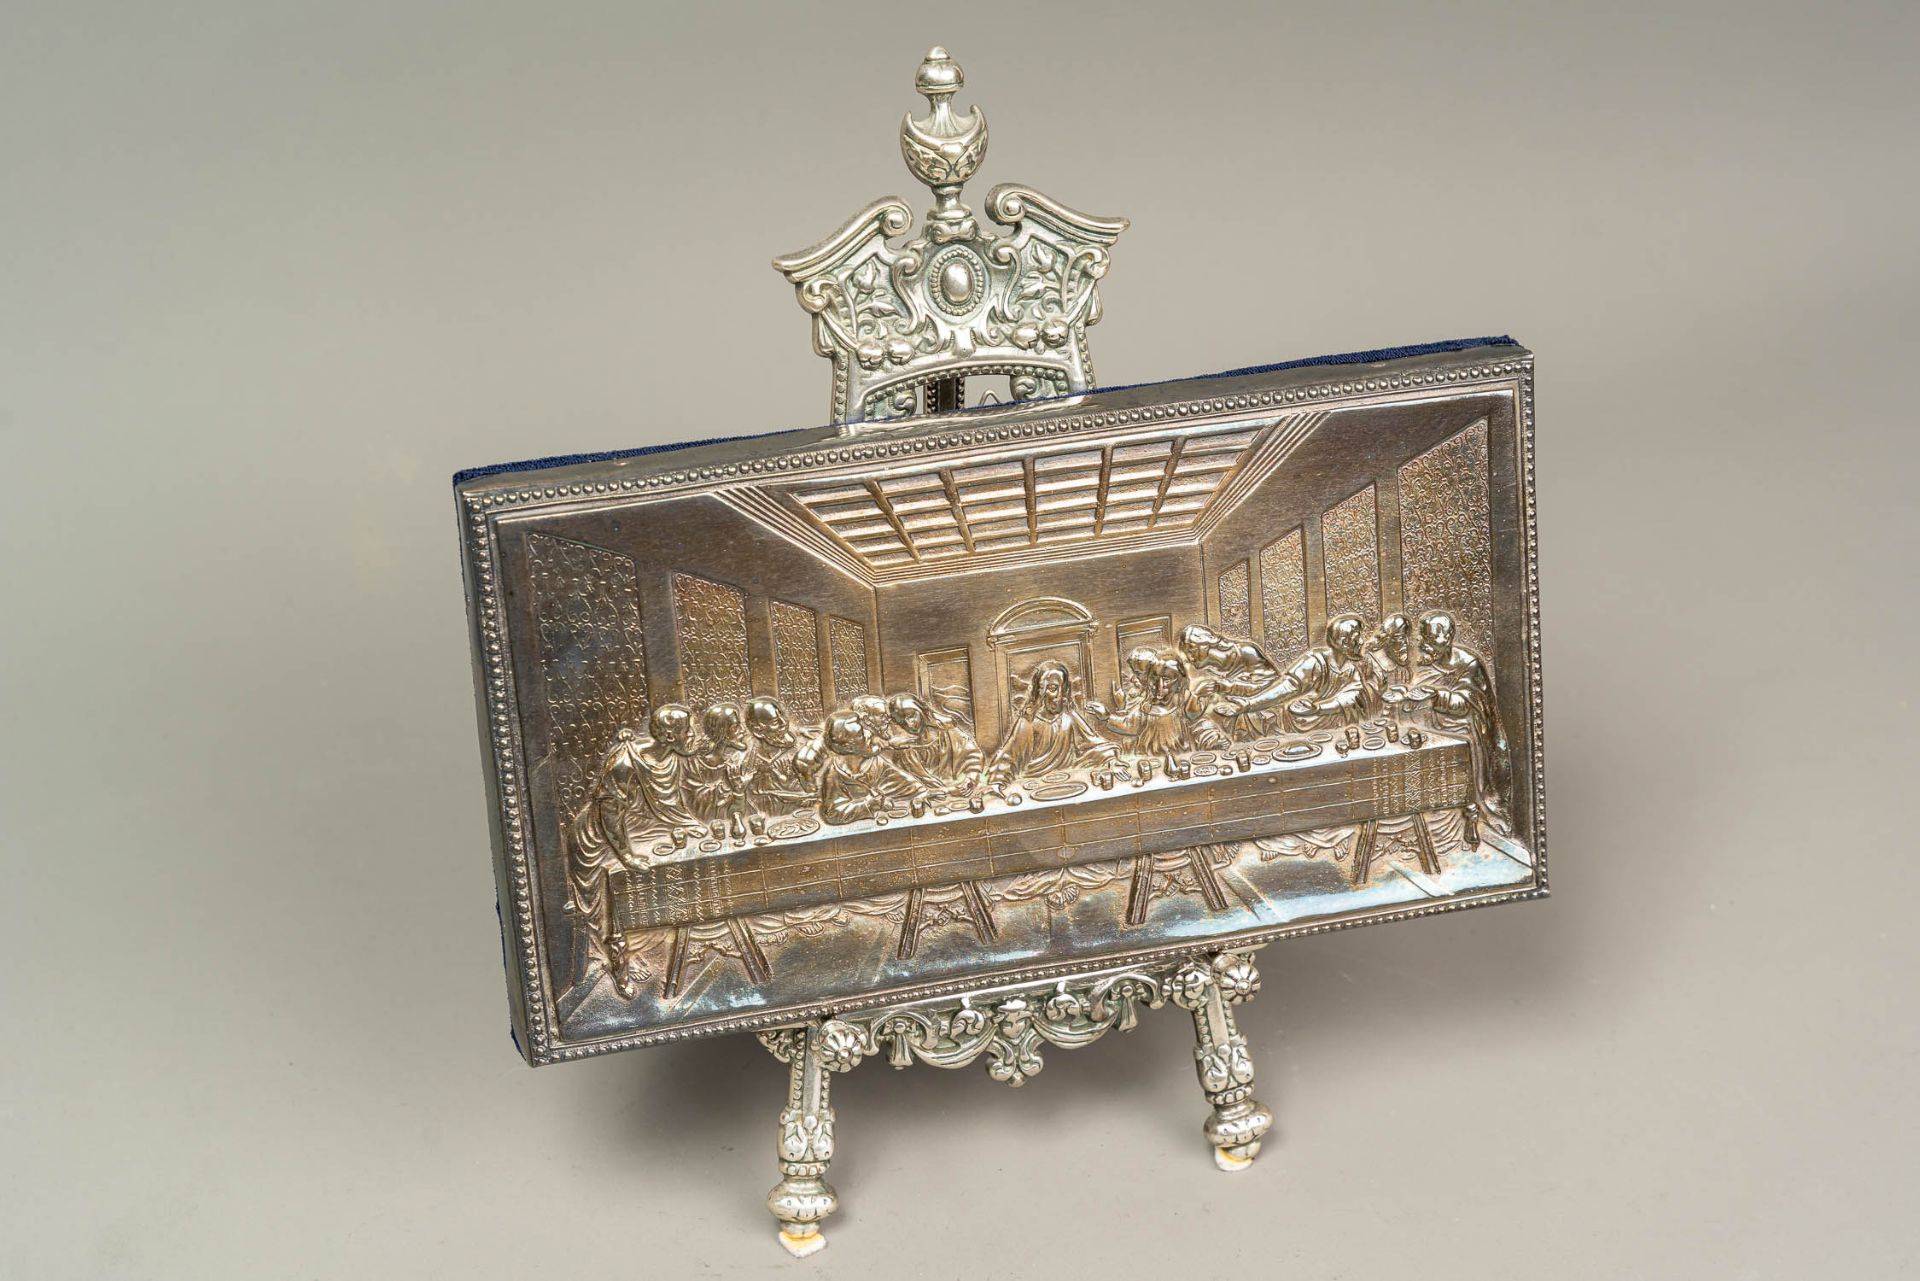 Miniature of the Last Supper